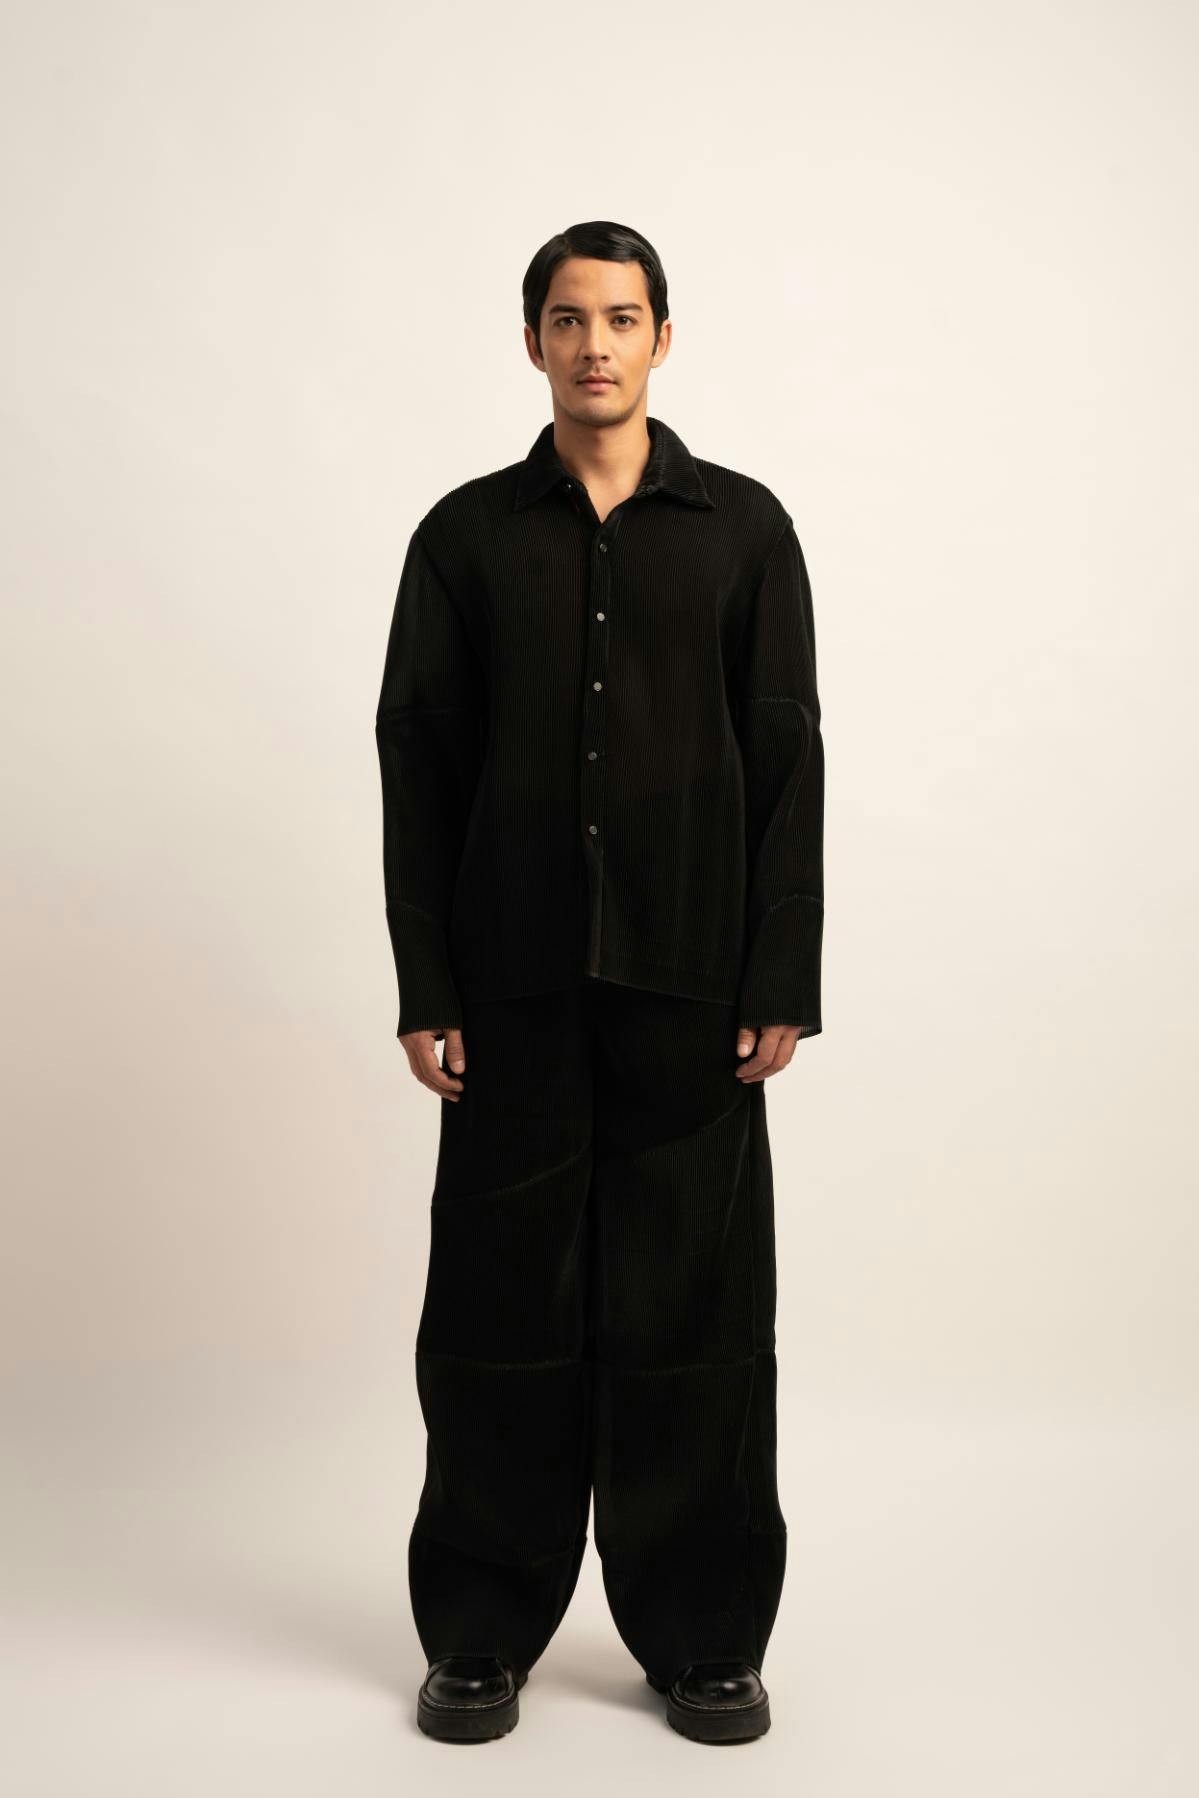 The Timeless Chaos Trousers, a product by Siddhant Agrawal Label